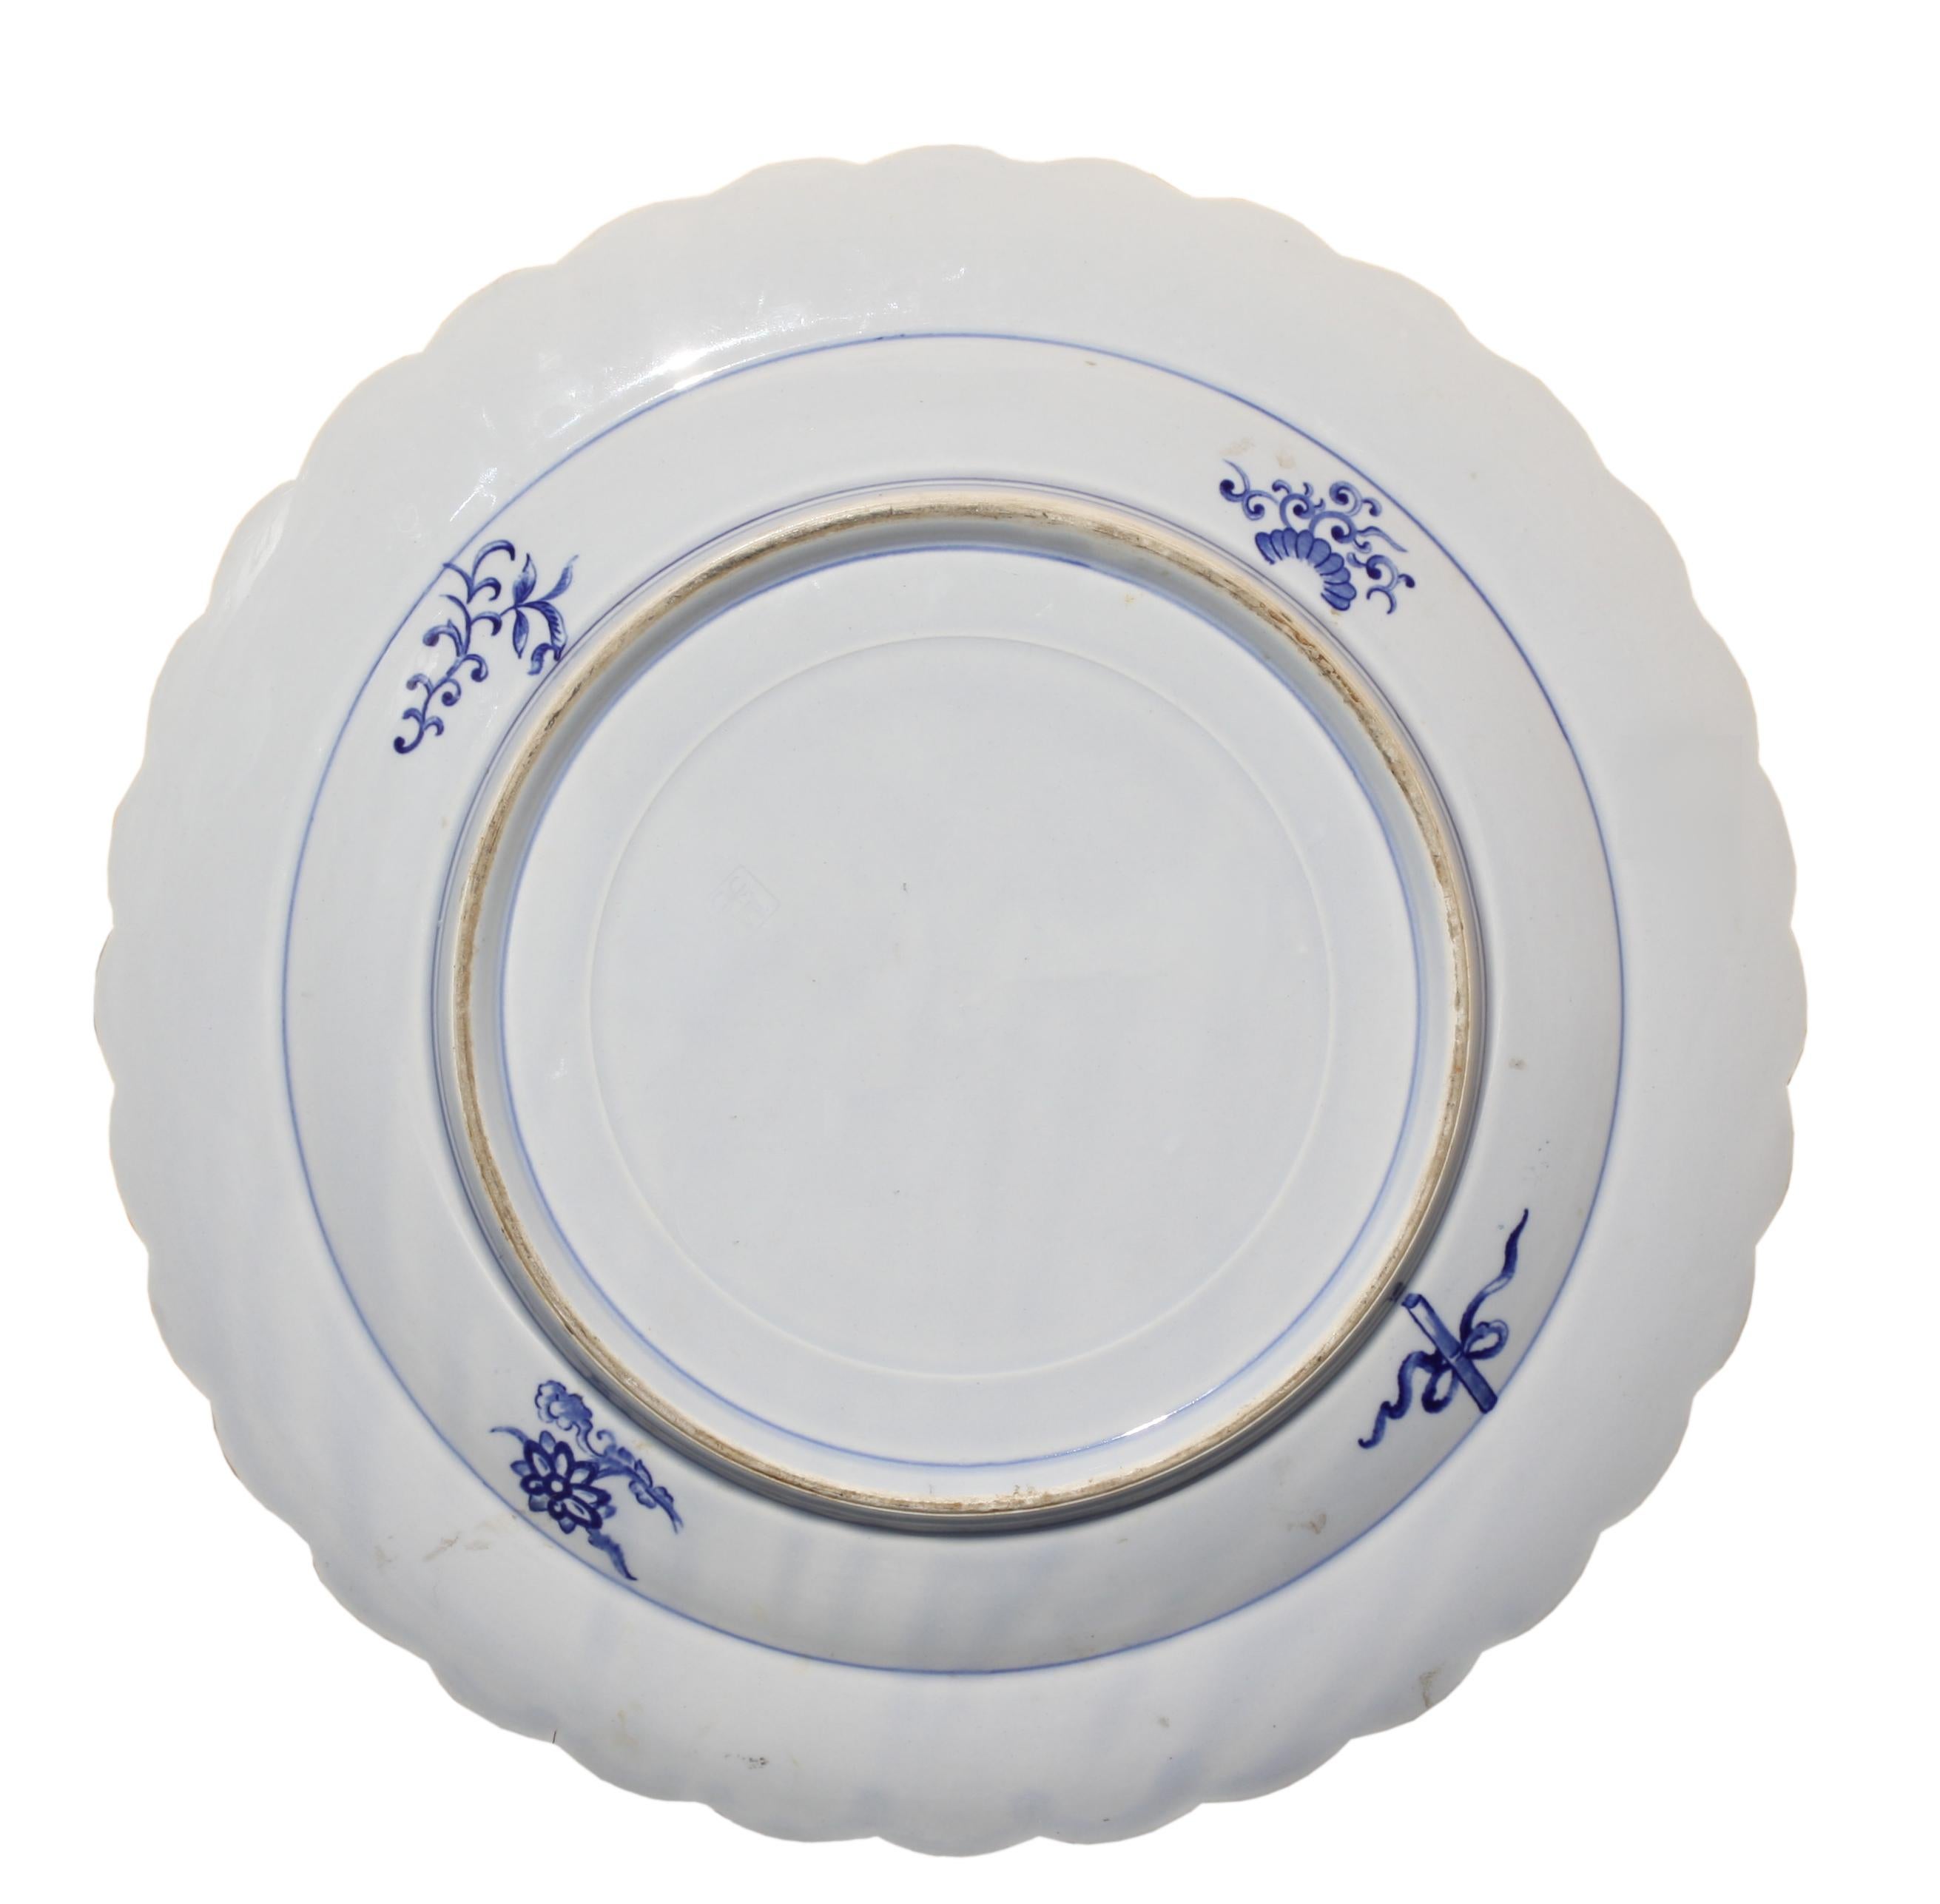 Japanese Blue and White Decorated Porcelain Plate, Meiji Period (1868-1912) In Good Condition For Sale In West Palm Beach, FL